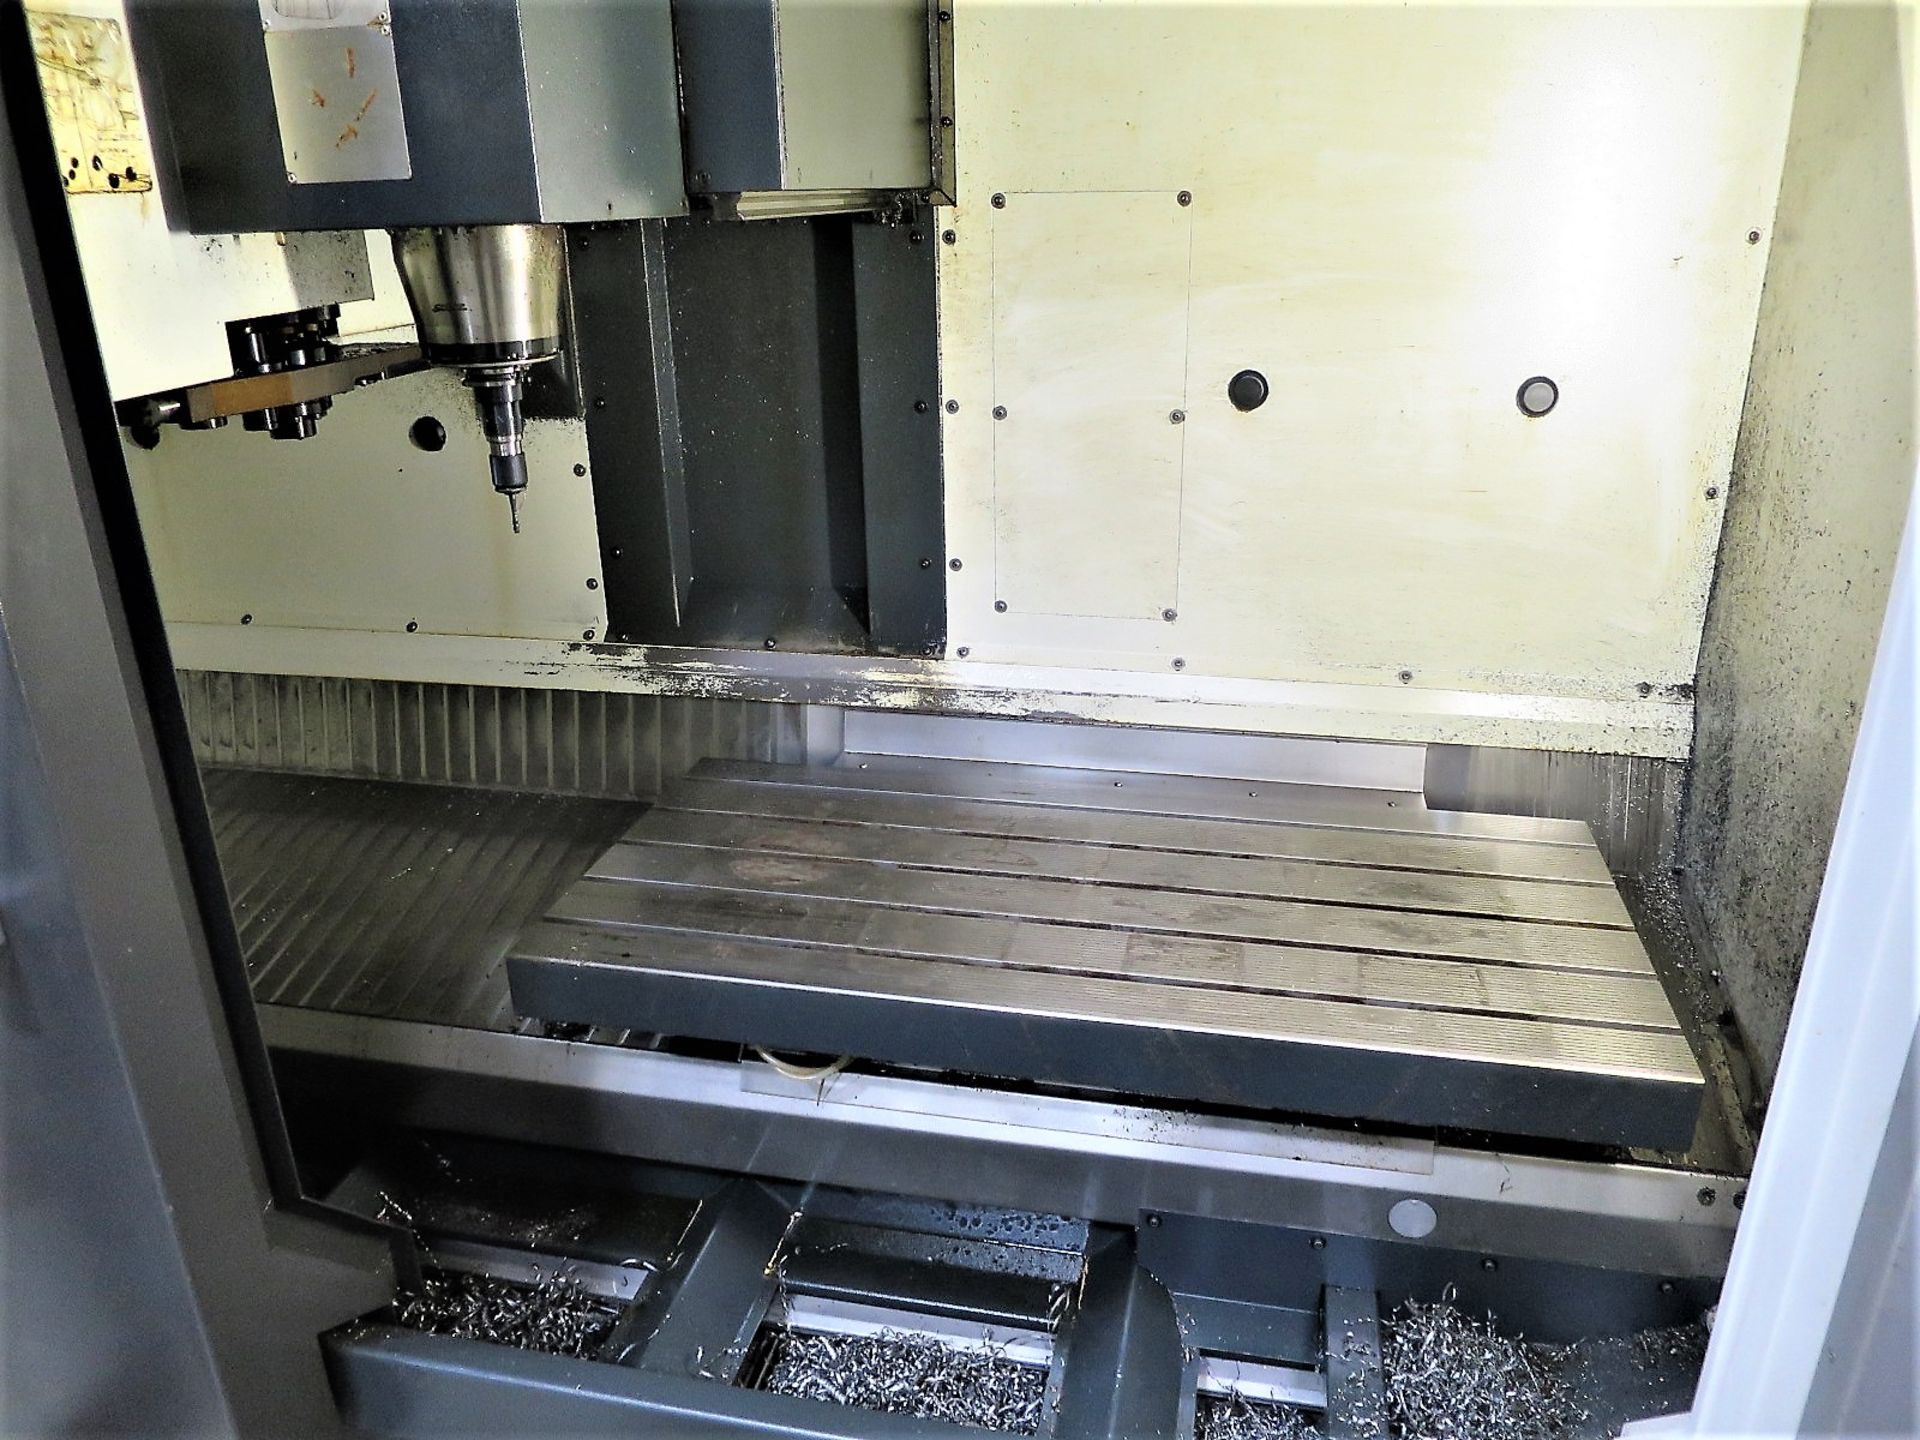 Mori Seiki Duravertical 10335 Eco 3-Axis CNC Vertical Machining Center, S/N 610300063E, New 2012 - Image 3 of 11